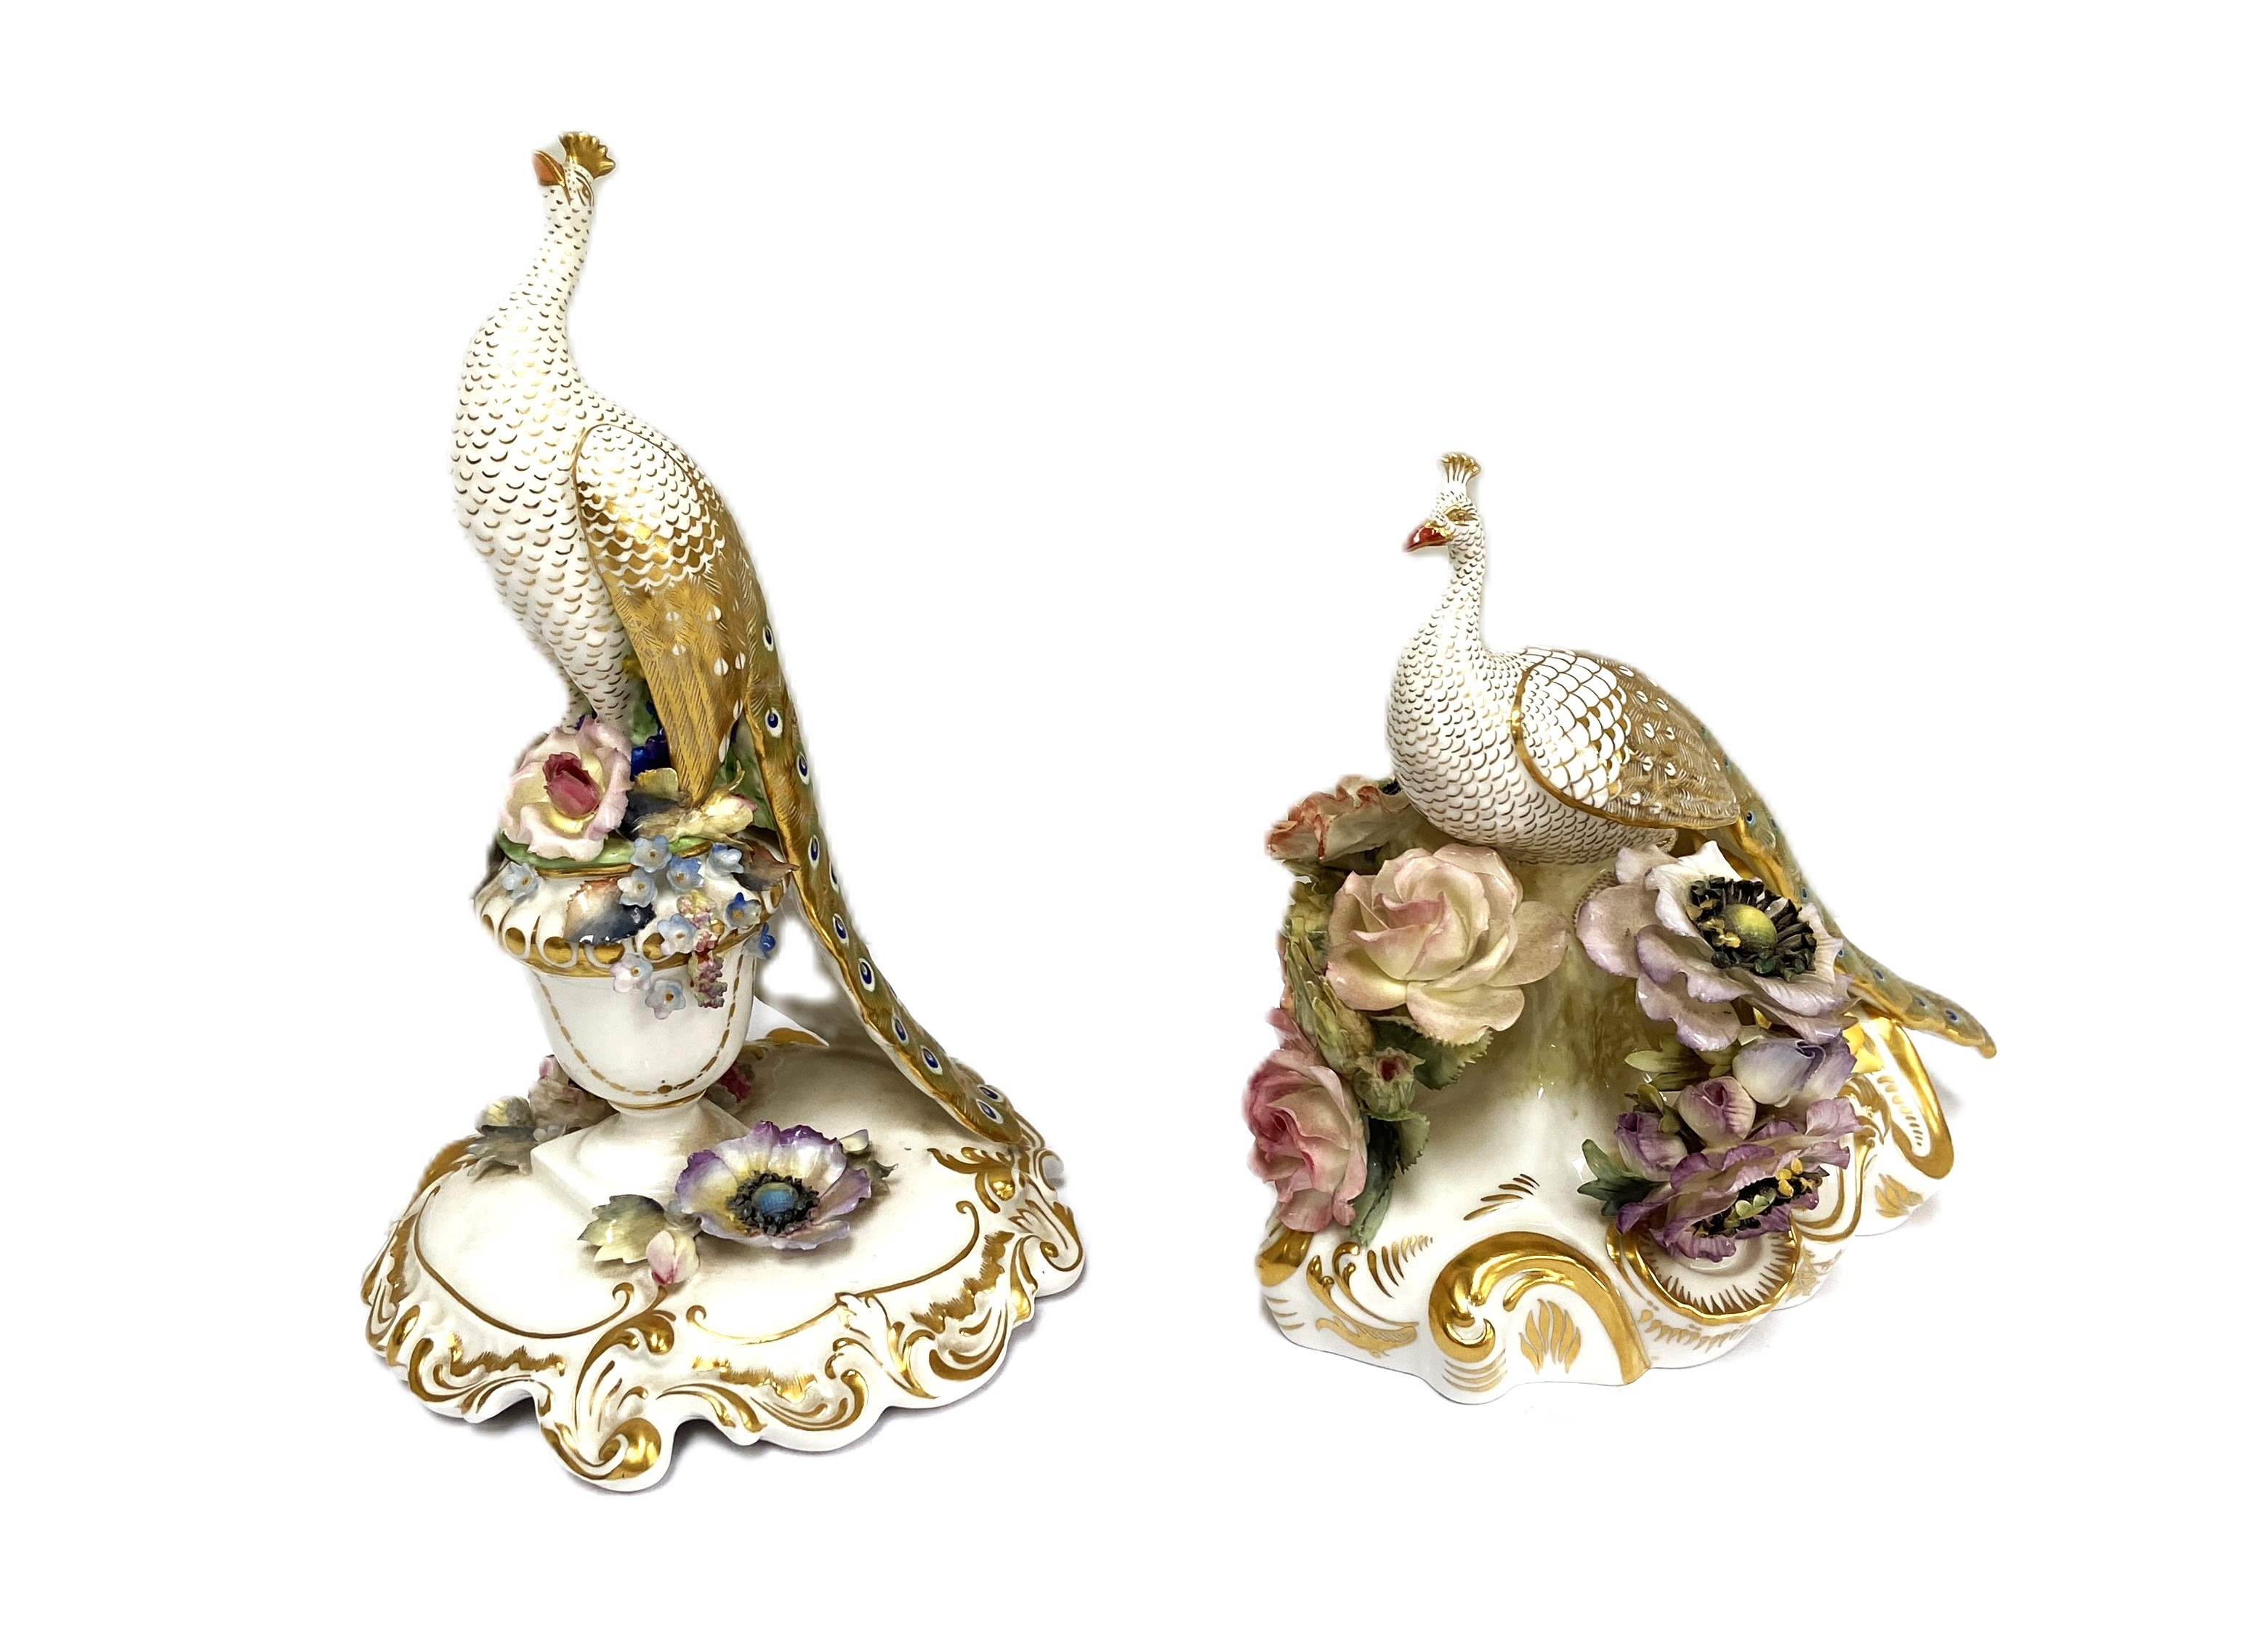 Royal Crown Derby, two figures of peacocks, both set on floral encrusted and gilt bases, decorated